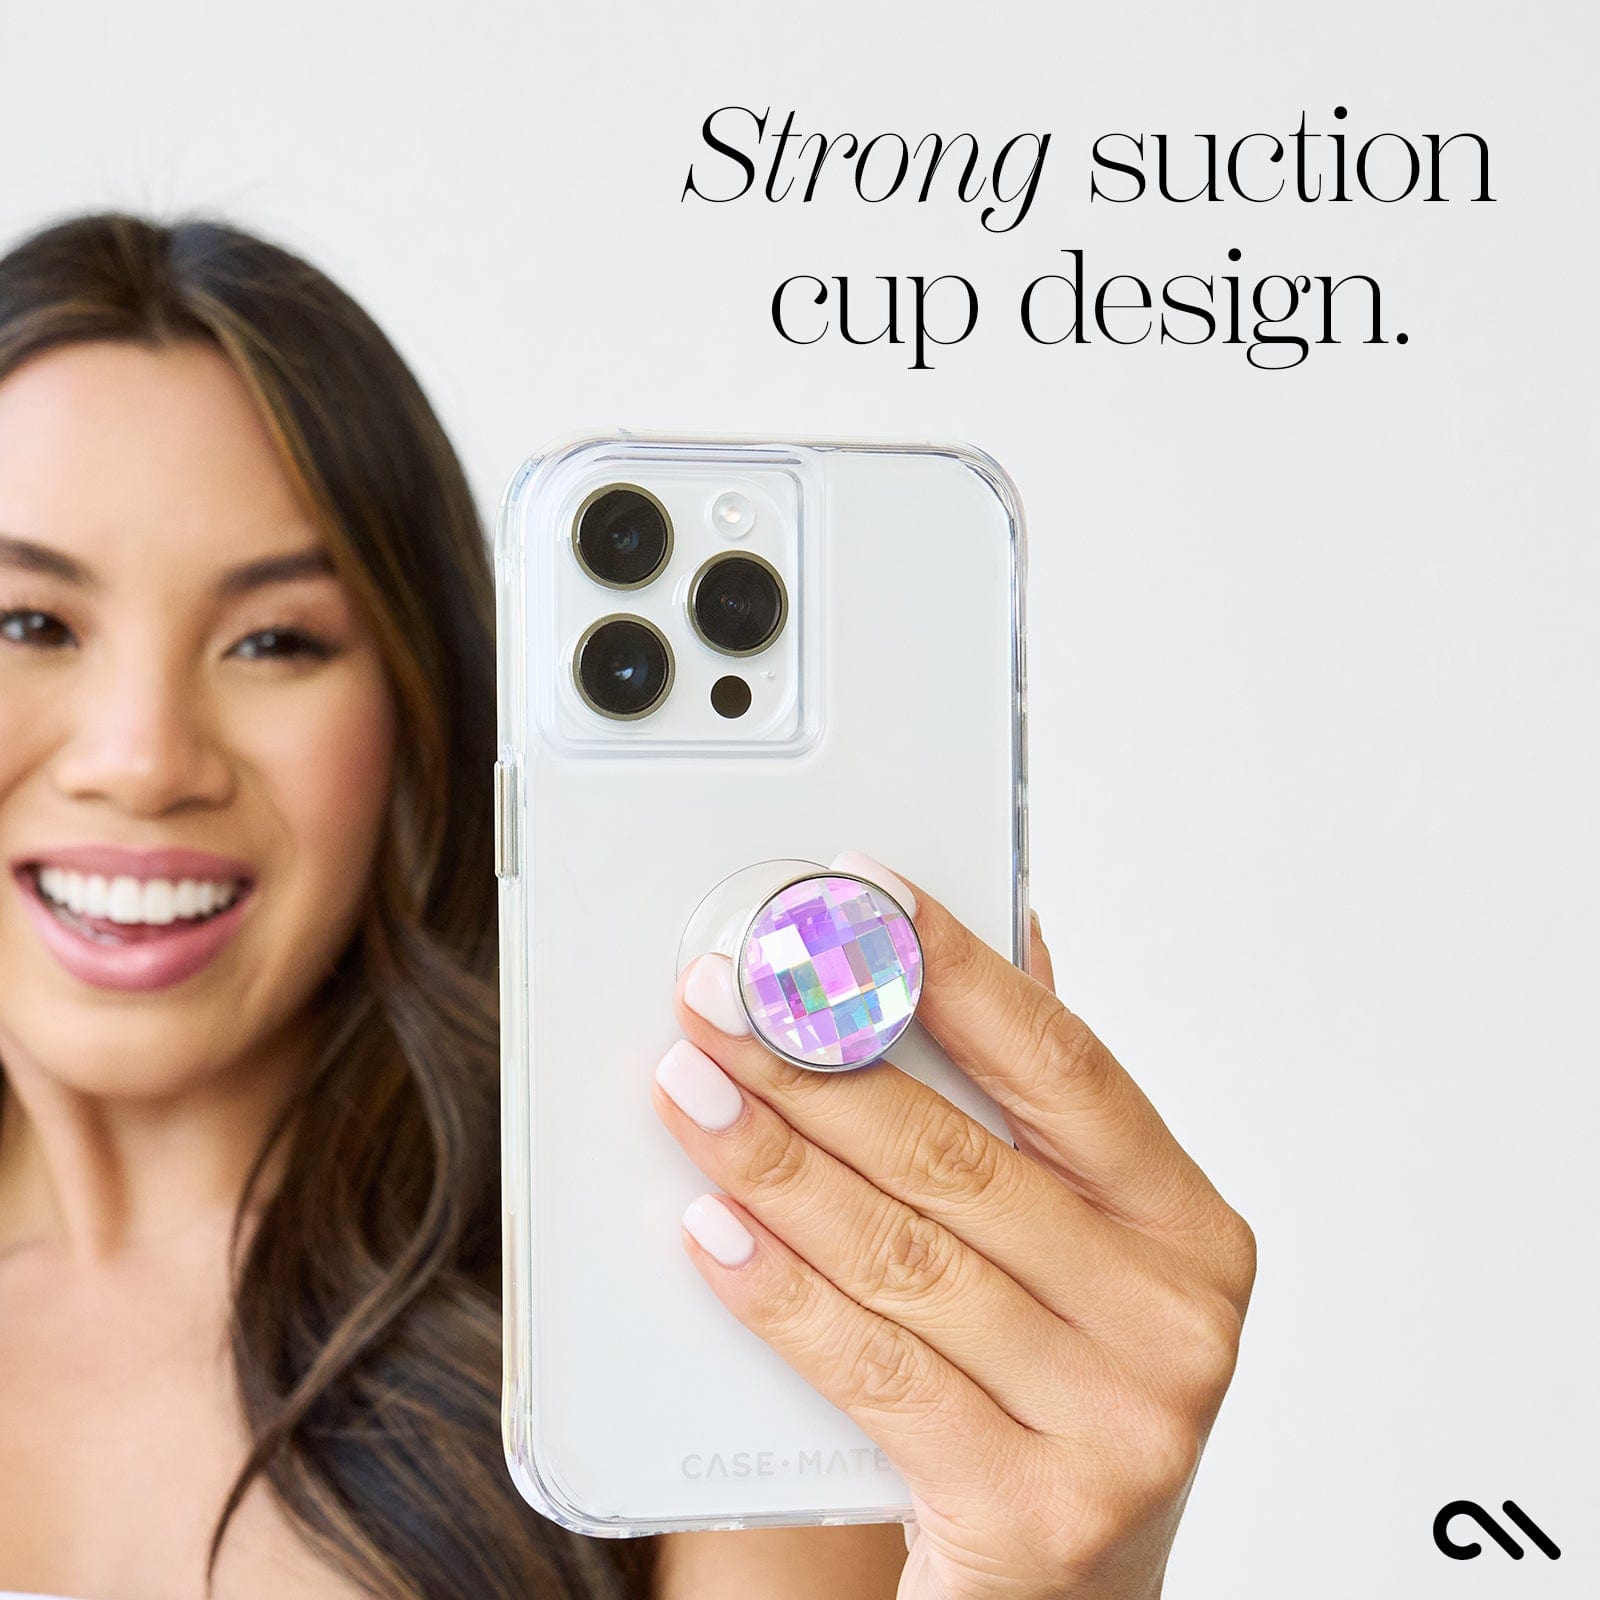 STRONG SUCTION CUP DESIGN